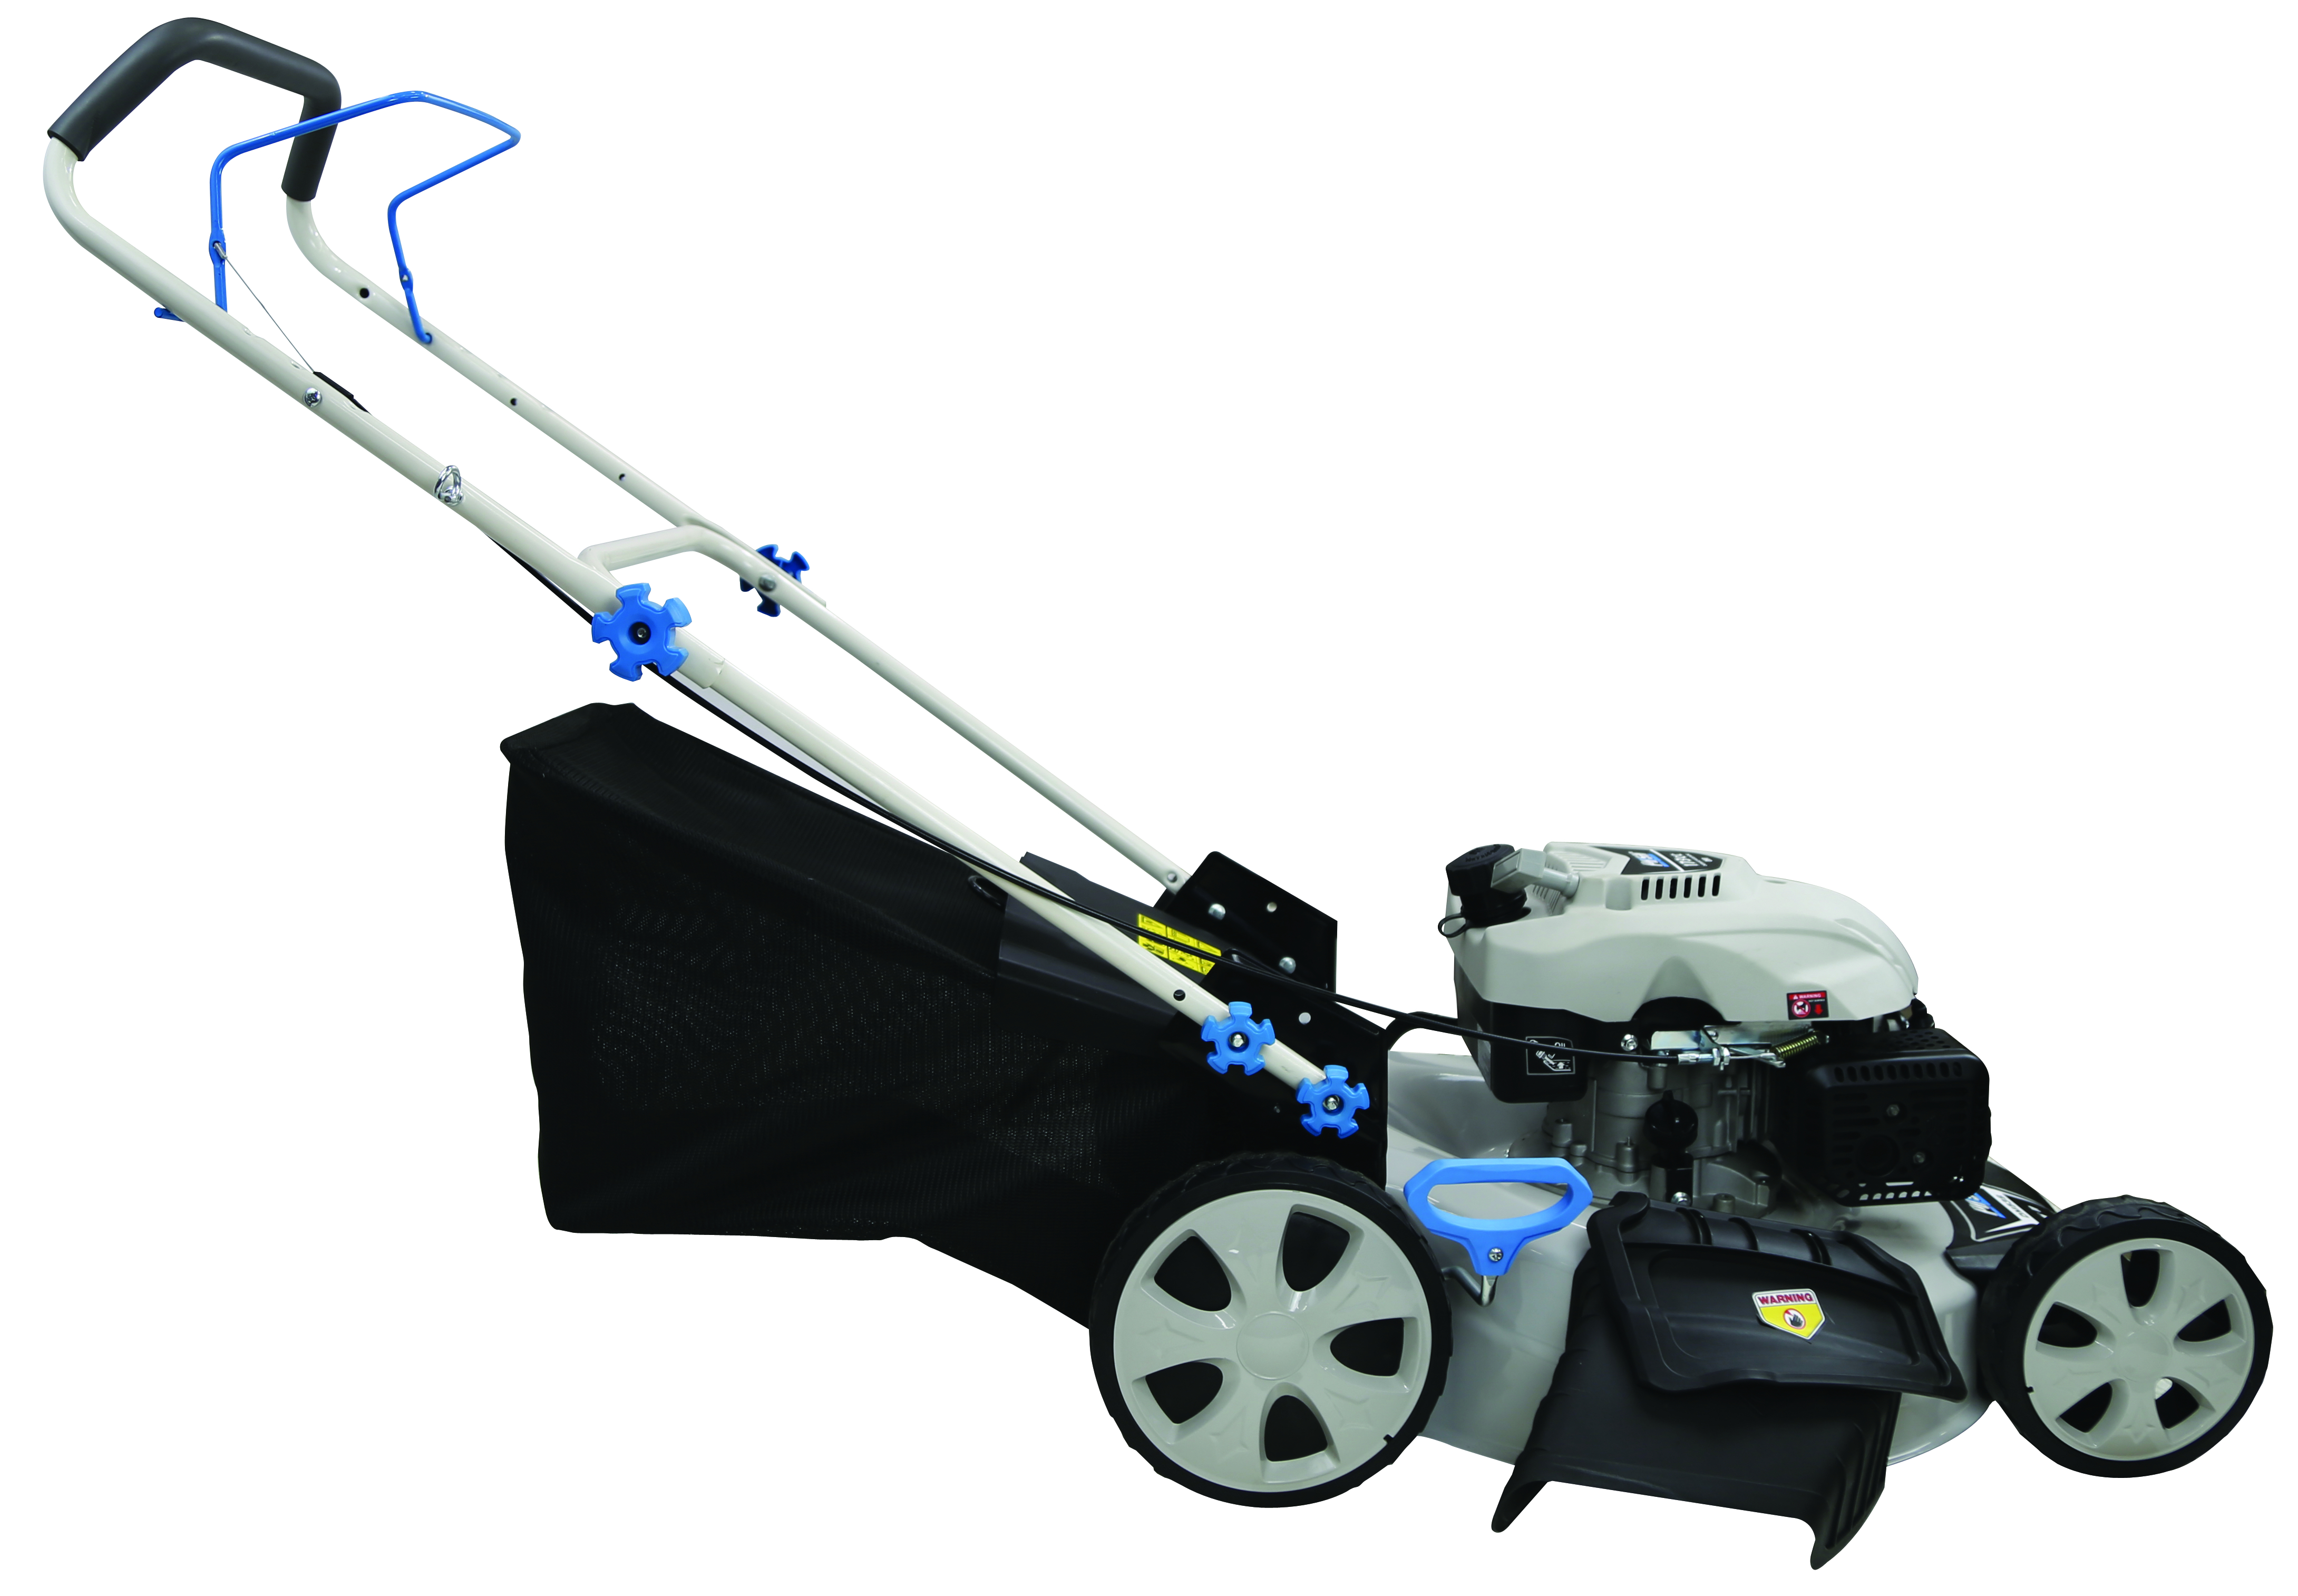 Pulsar 21” Self-Propelled Gasoline Powered Lawn Mower with 7 Position Height Adjustment, PTG1221S